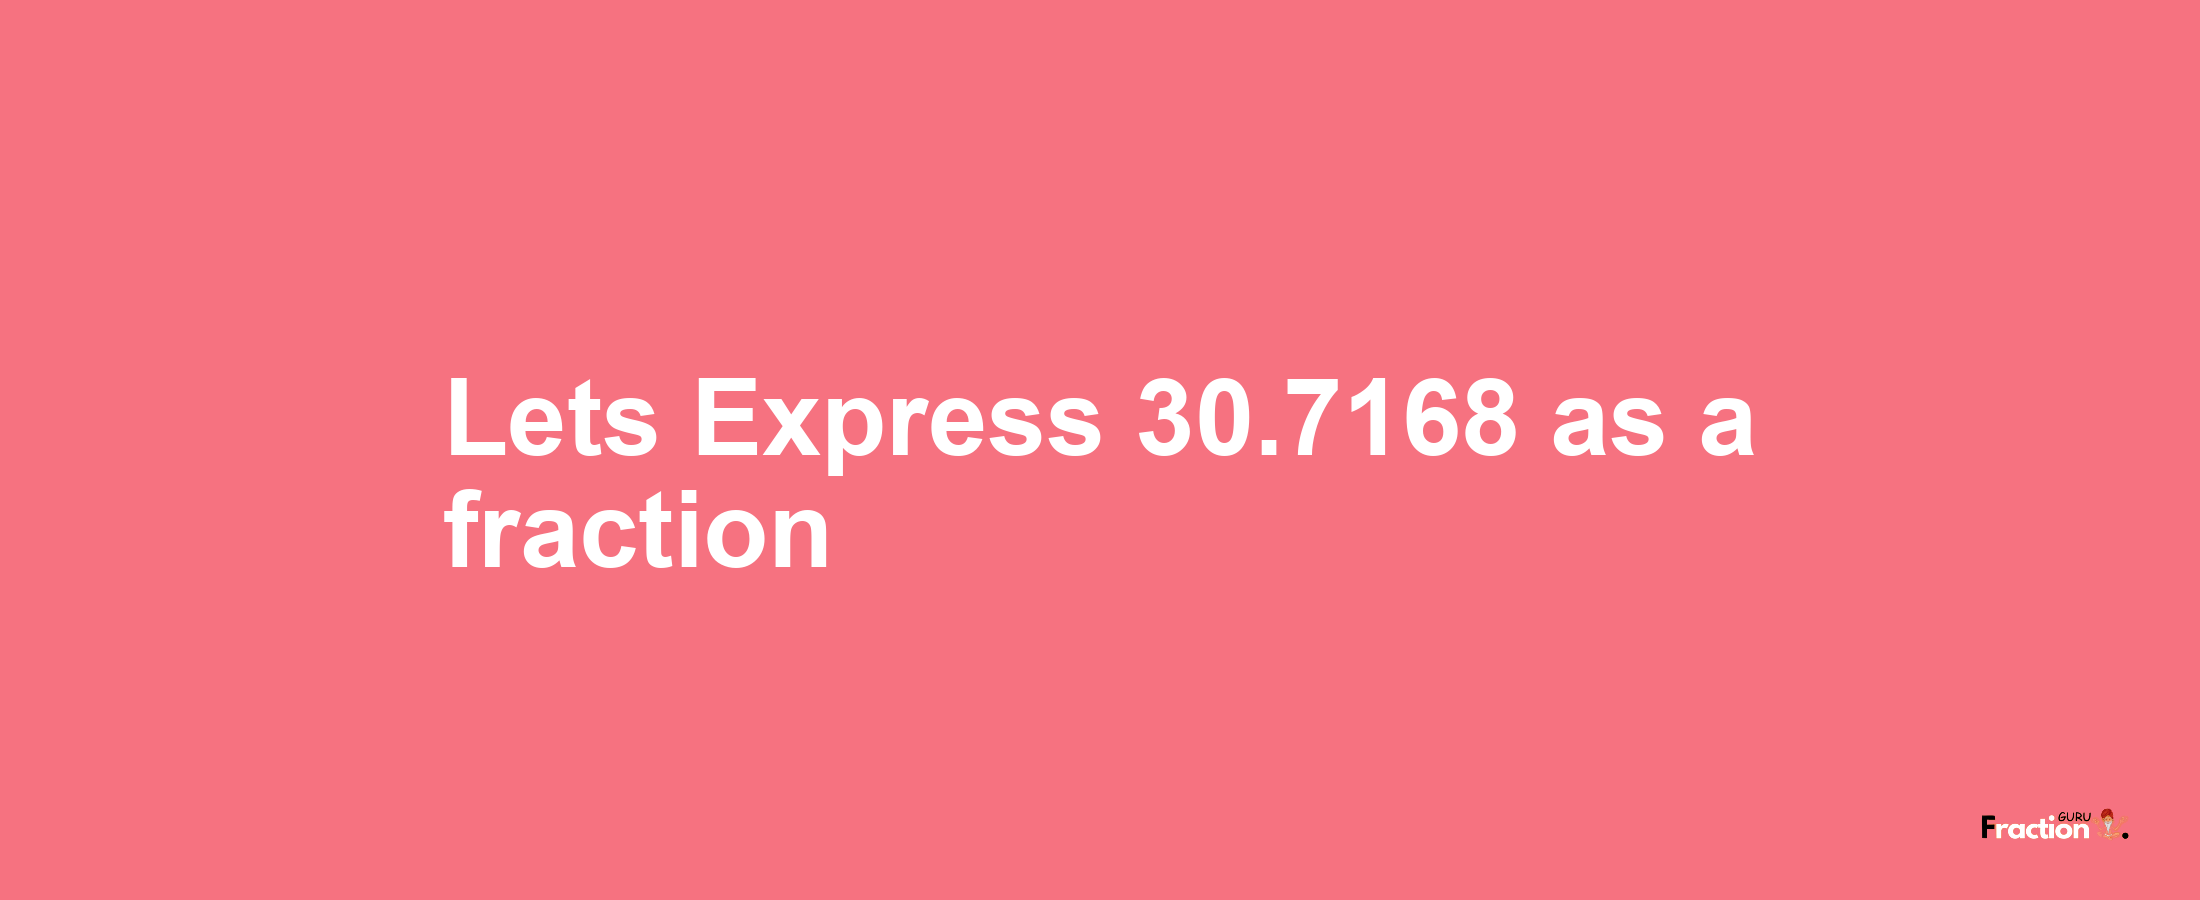 Lets Express 30.7168 as afraction